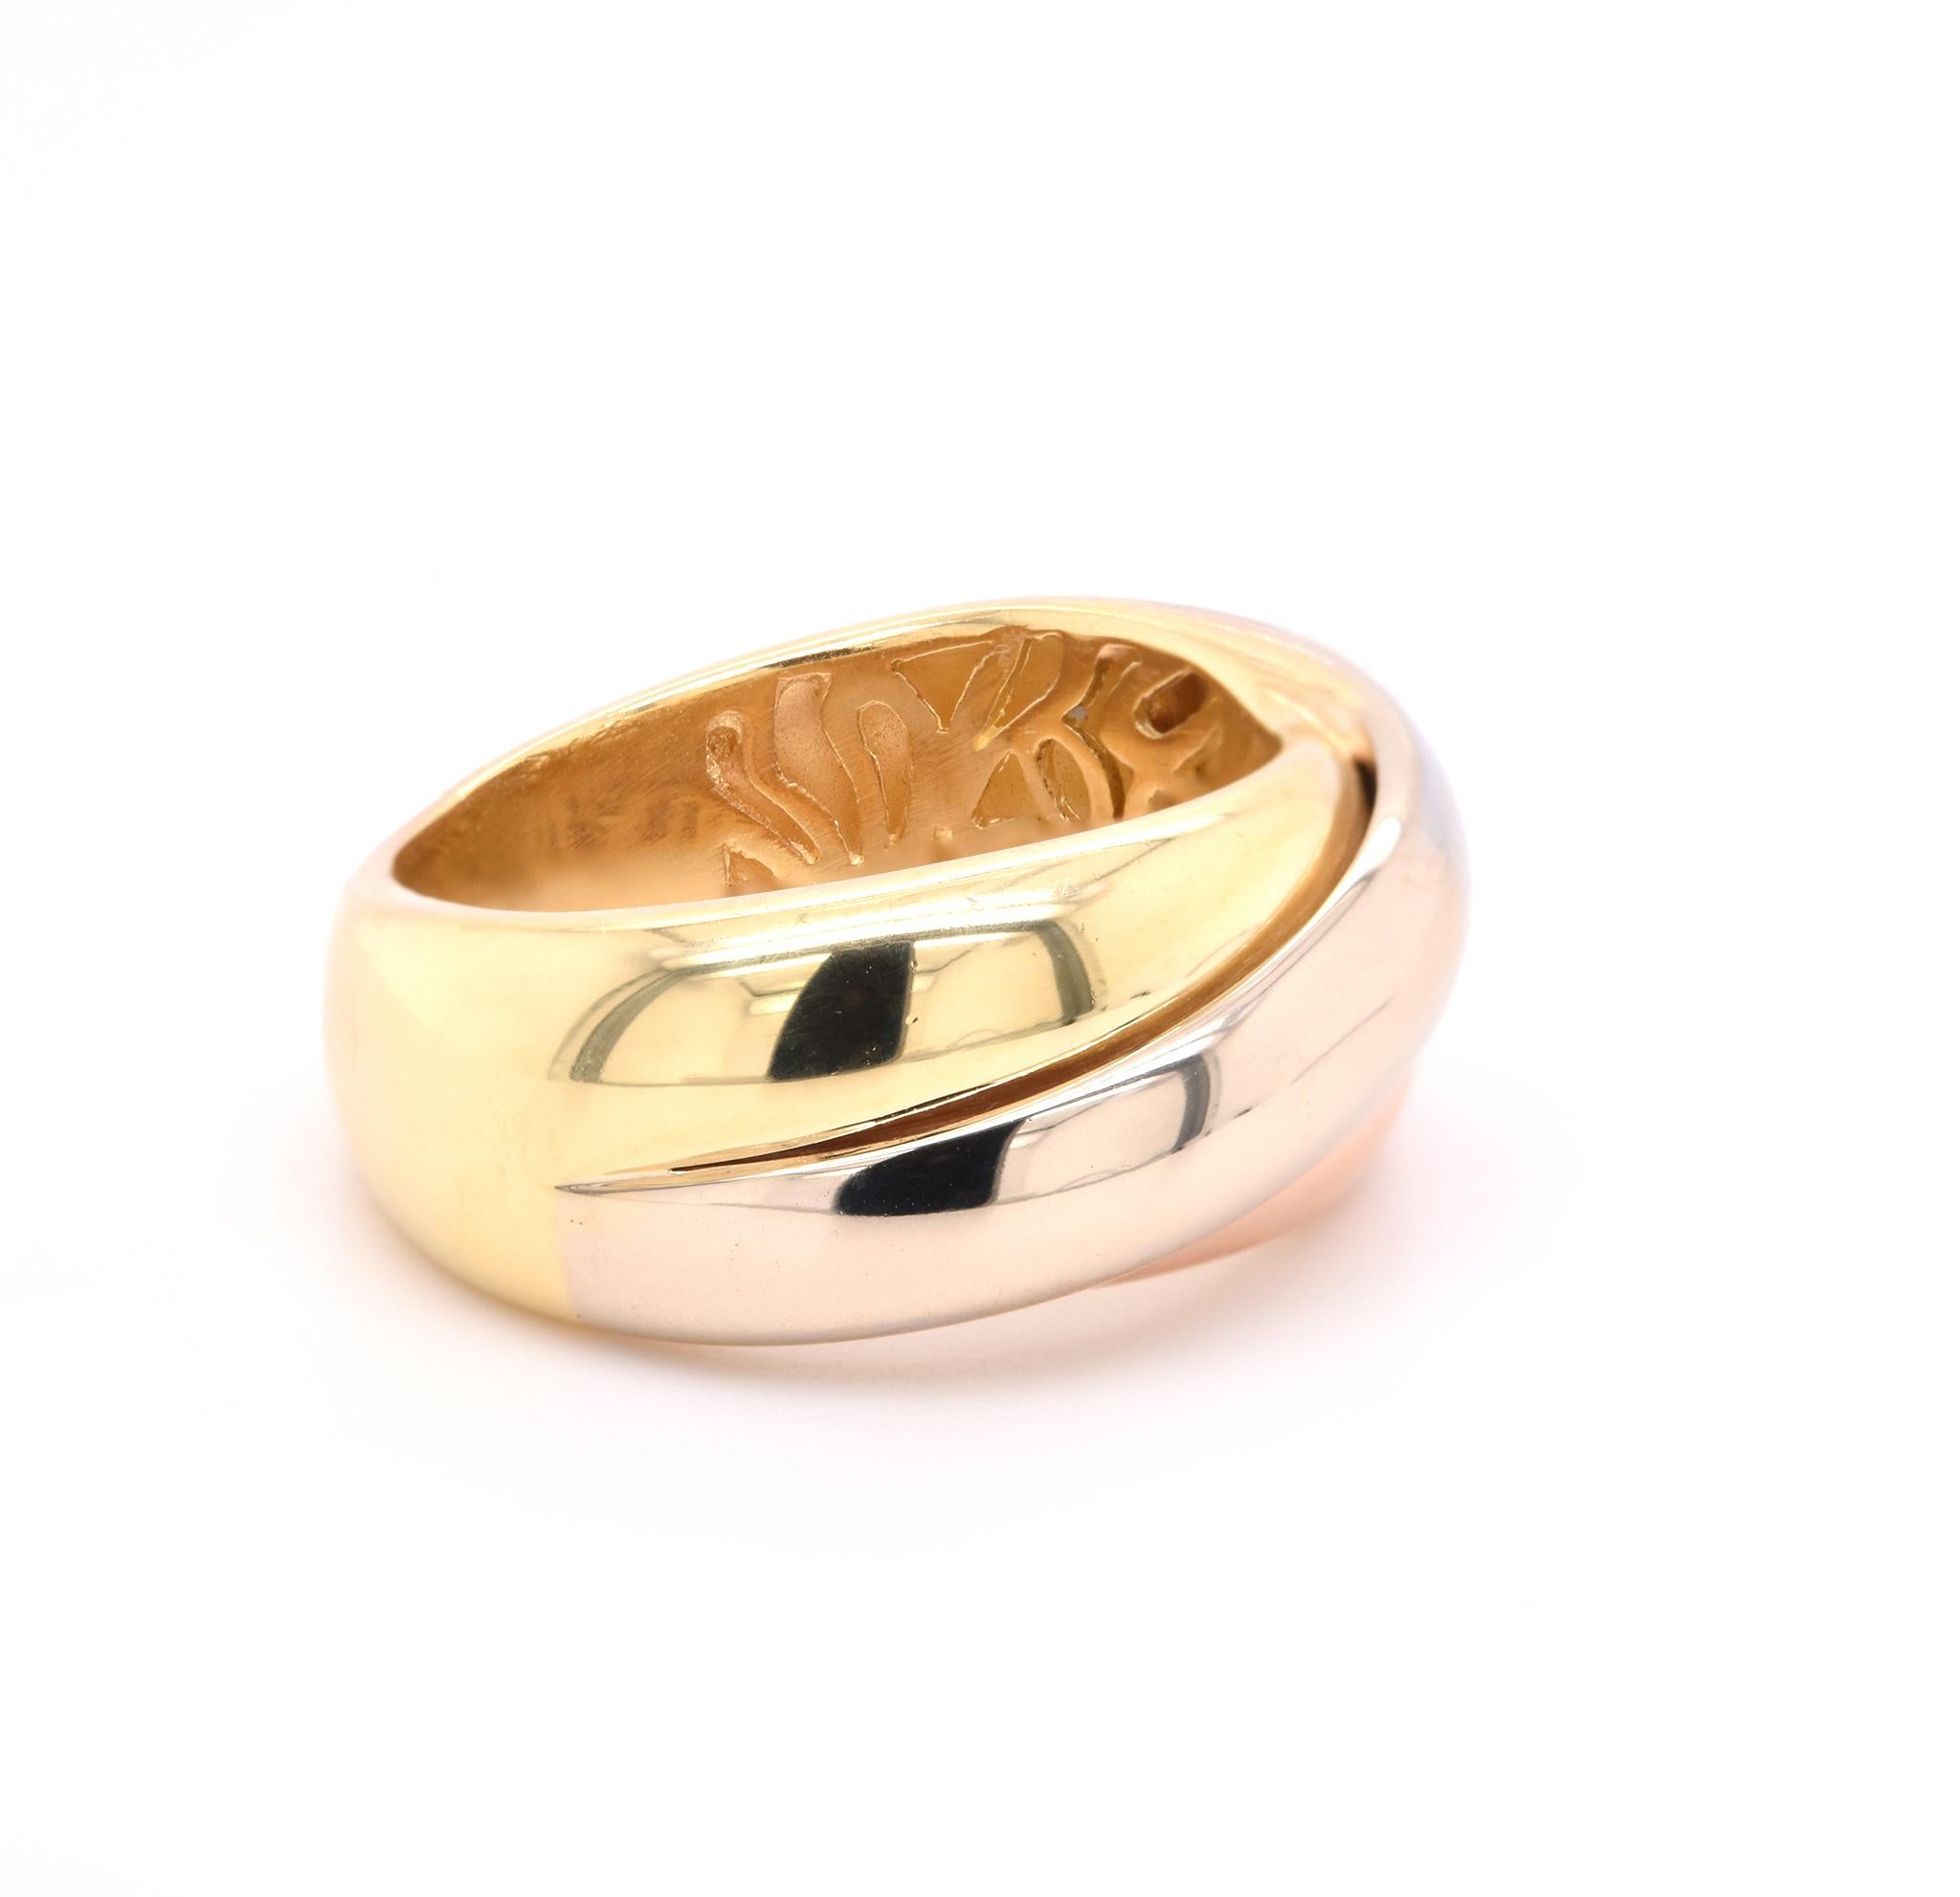 Designer: custom 
Material: 18k yellow, rose, and white gold
Dimensions: the ring measures 9mm wide
Size: 6
Weight:  10.1 grams